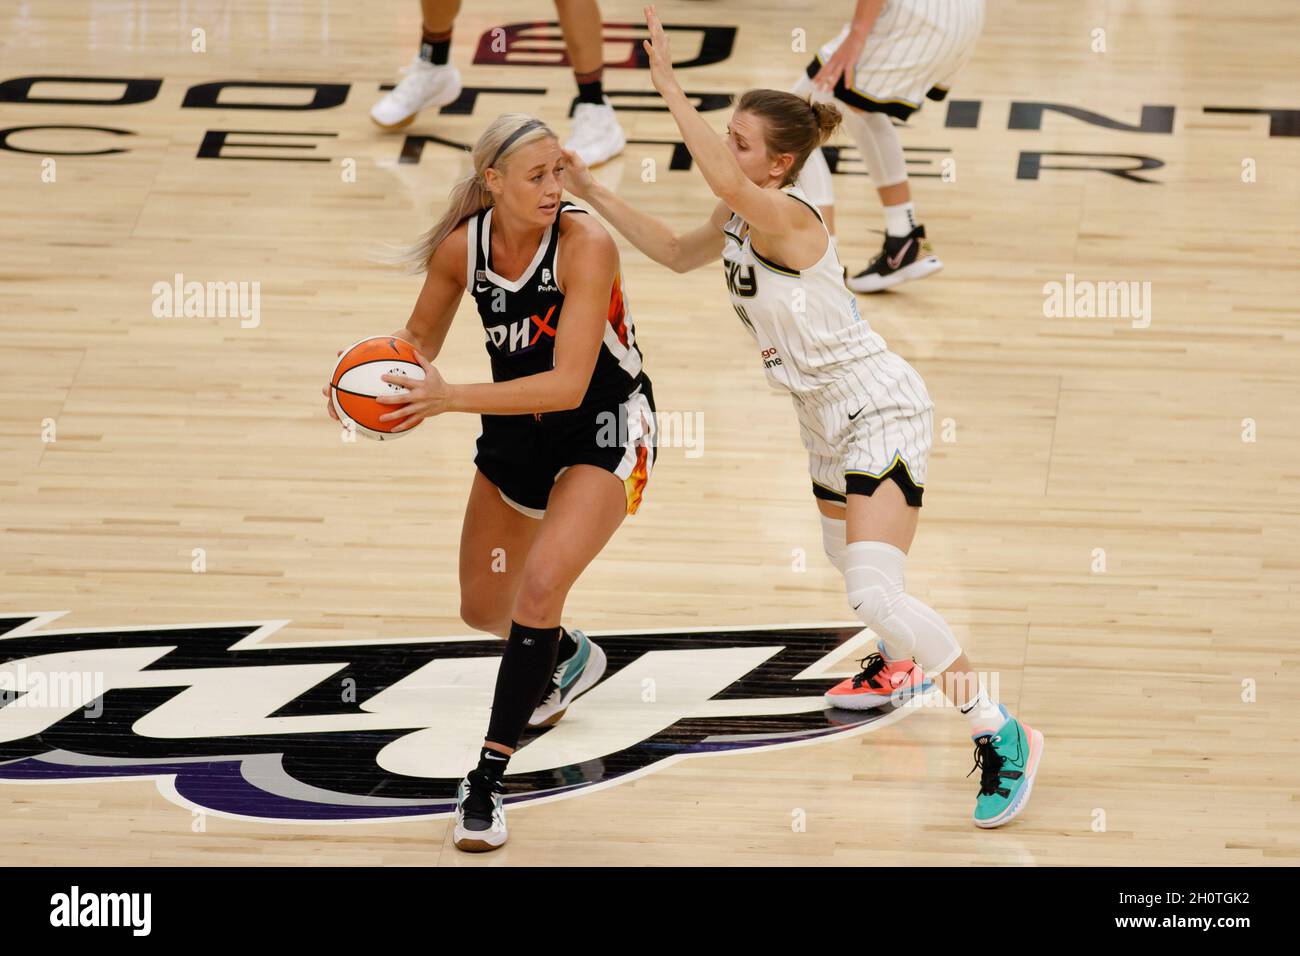 Sophie Cunningham to re-sign with Phoenix Mercury - Just Women's Sports